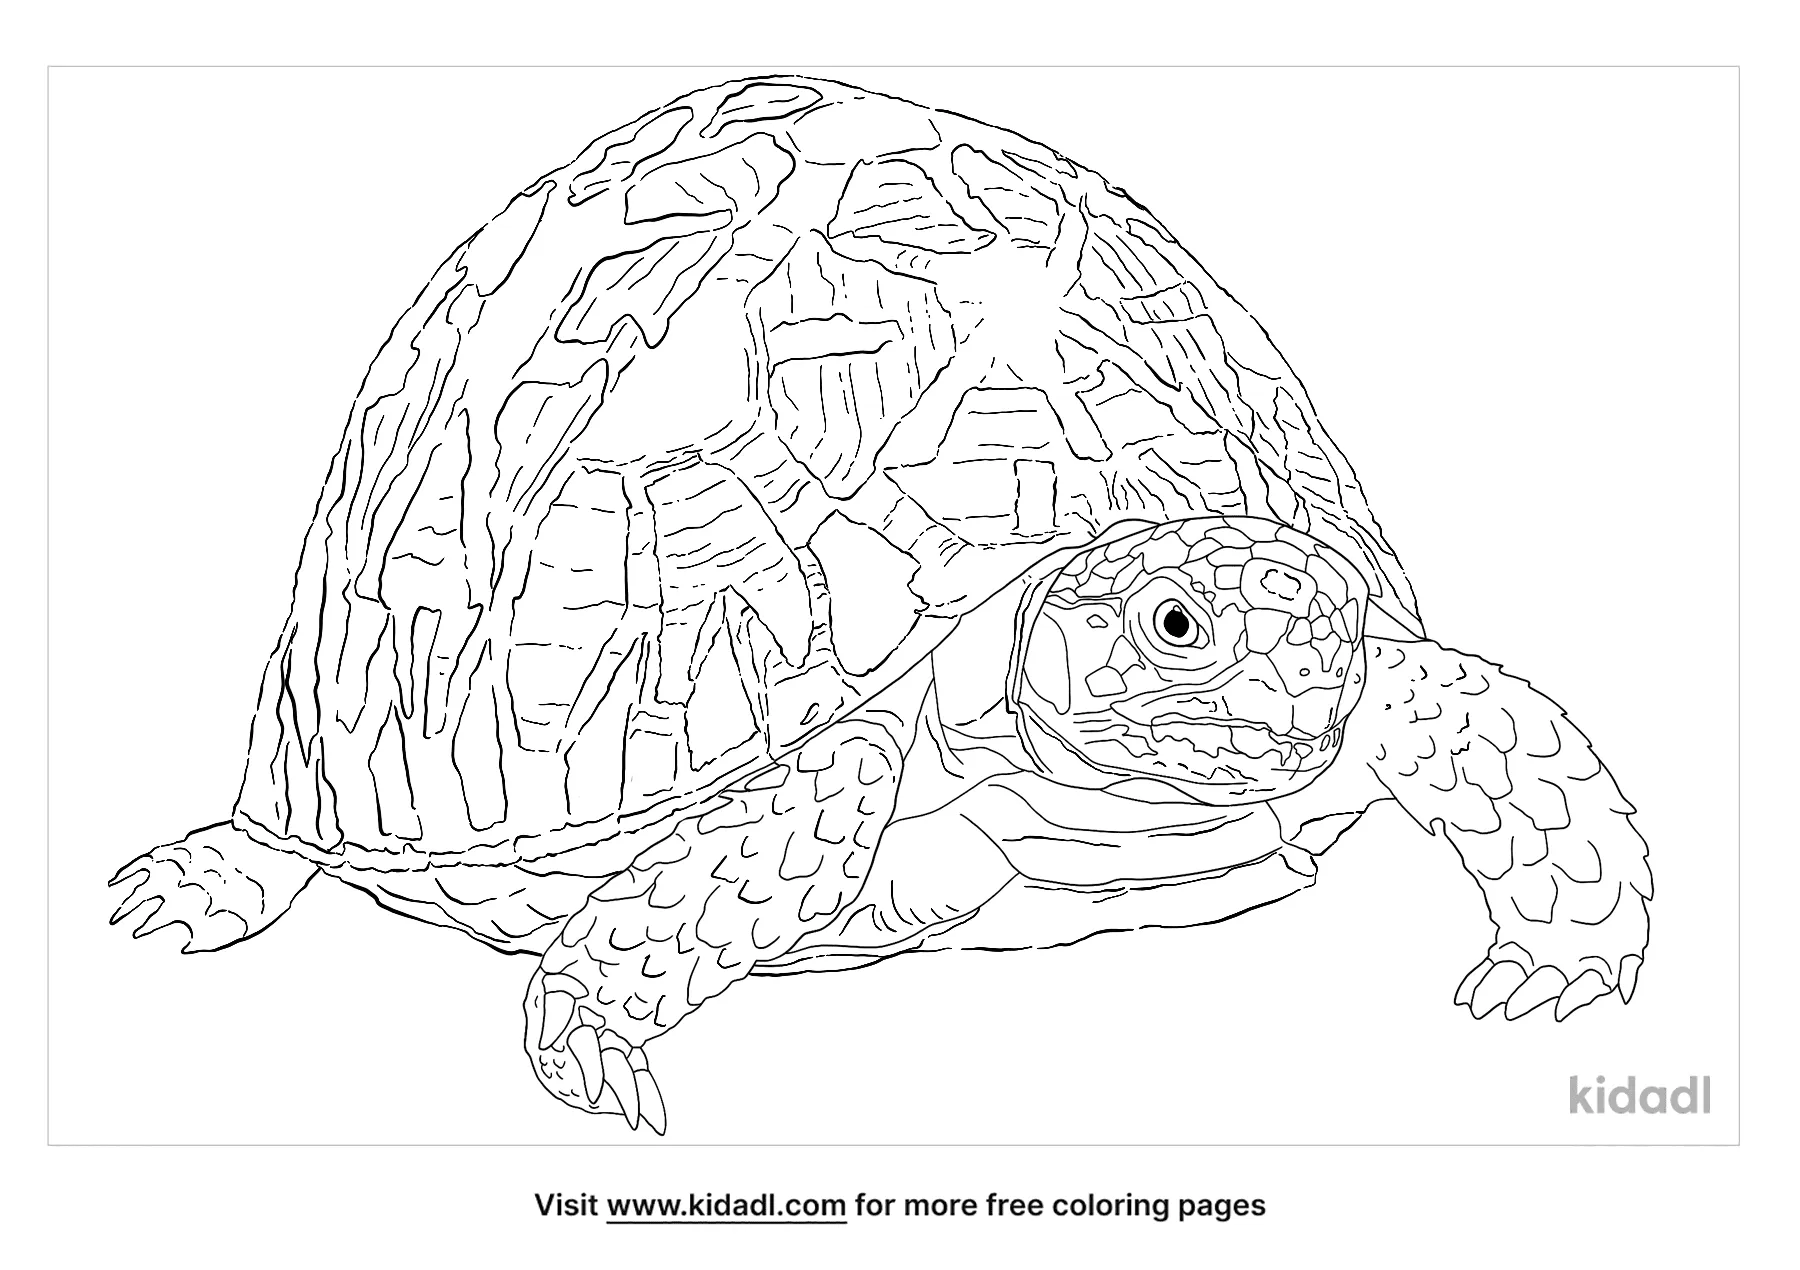 Free Indian Star Tortoise Coloring Page | Coloring Page Printables | Kidadl